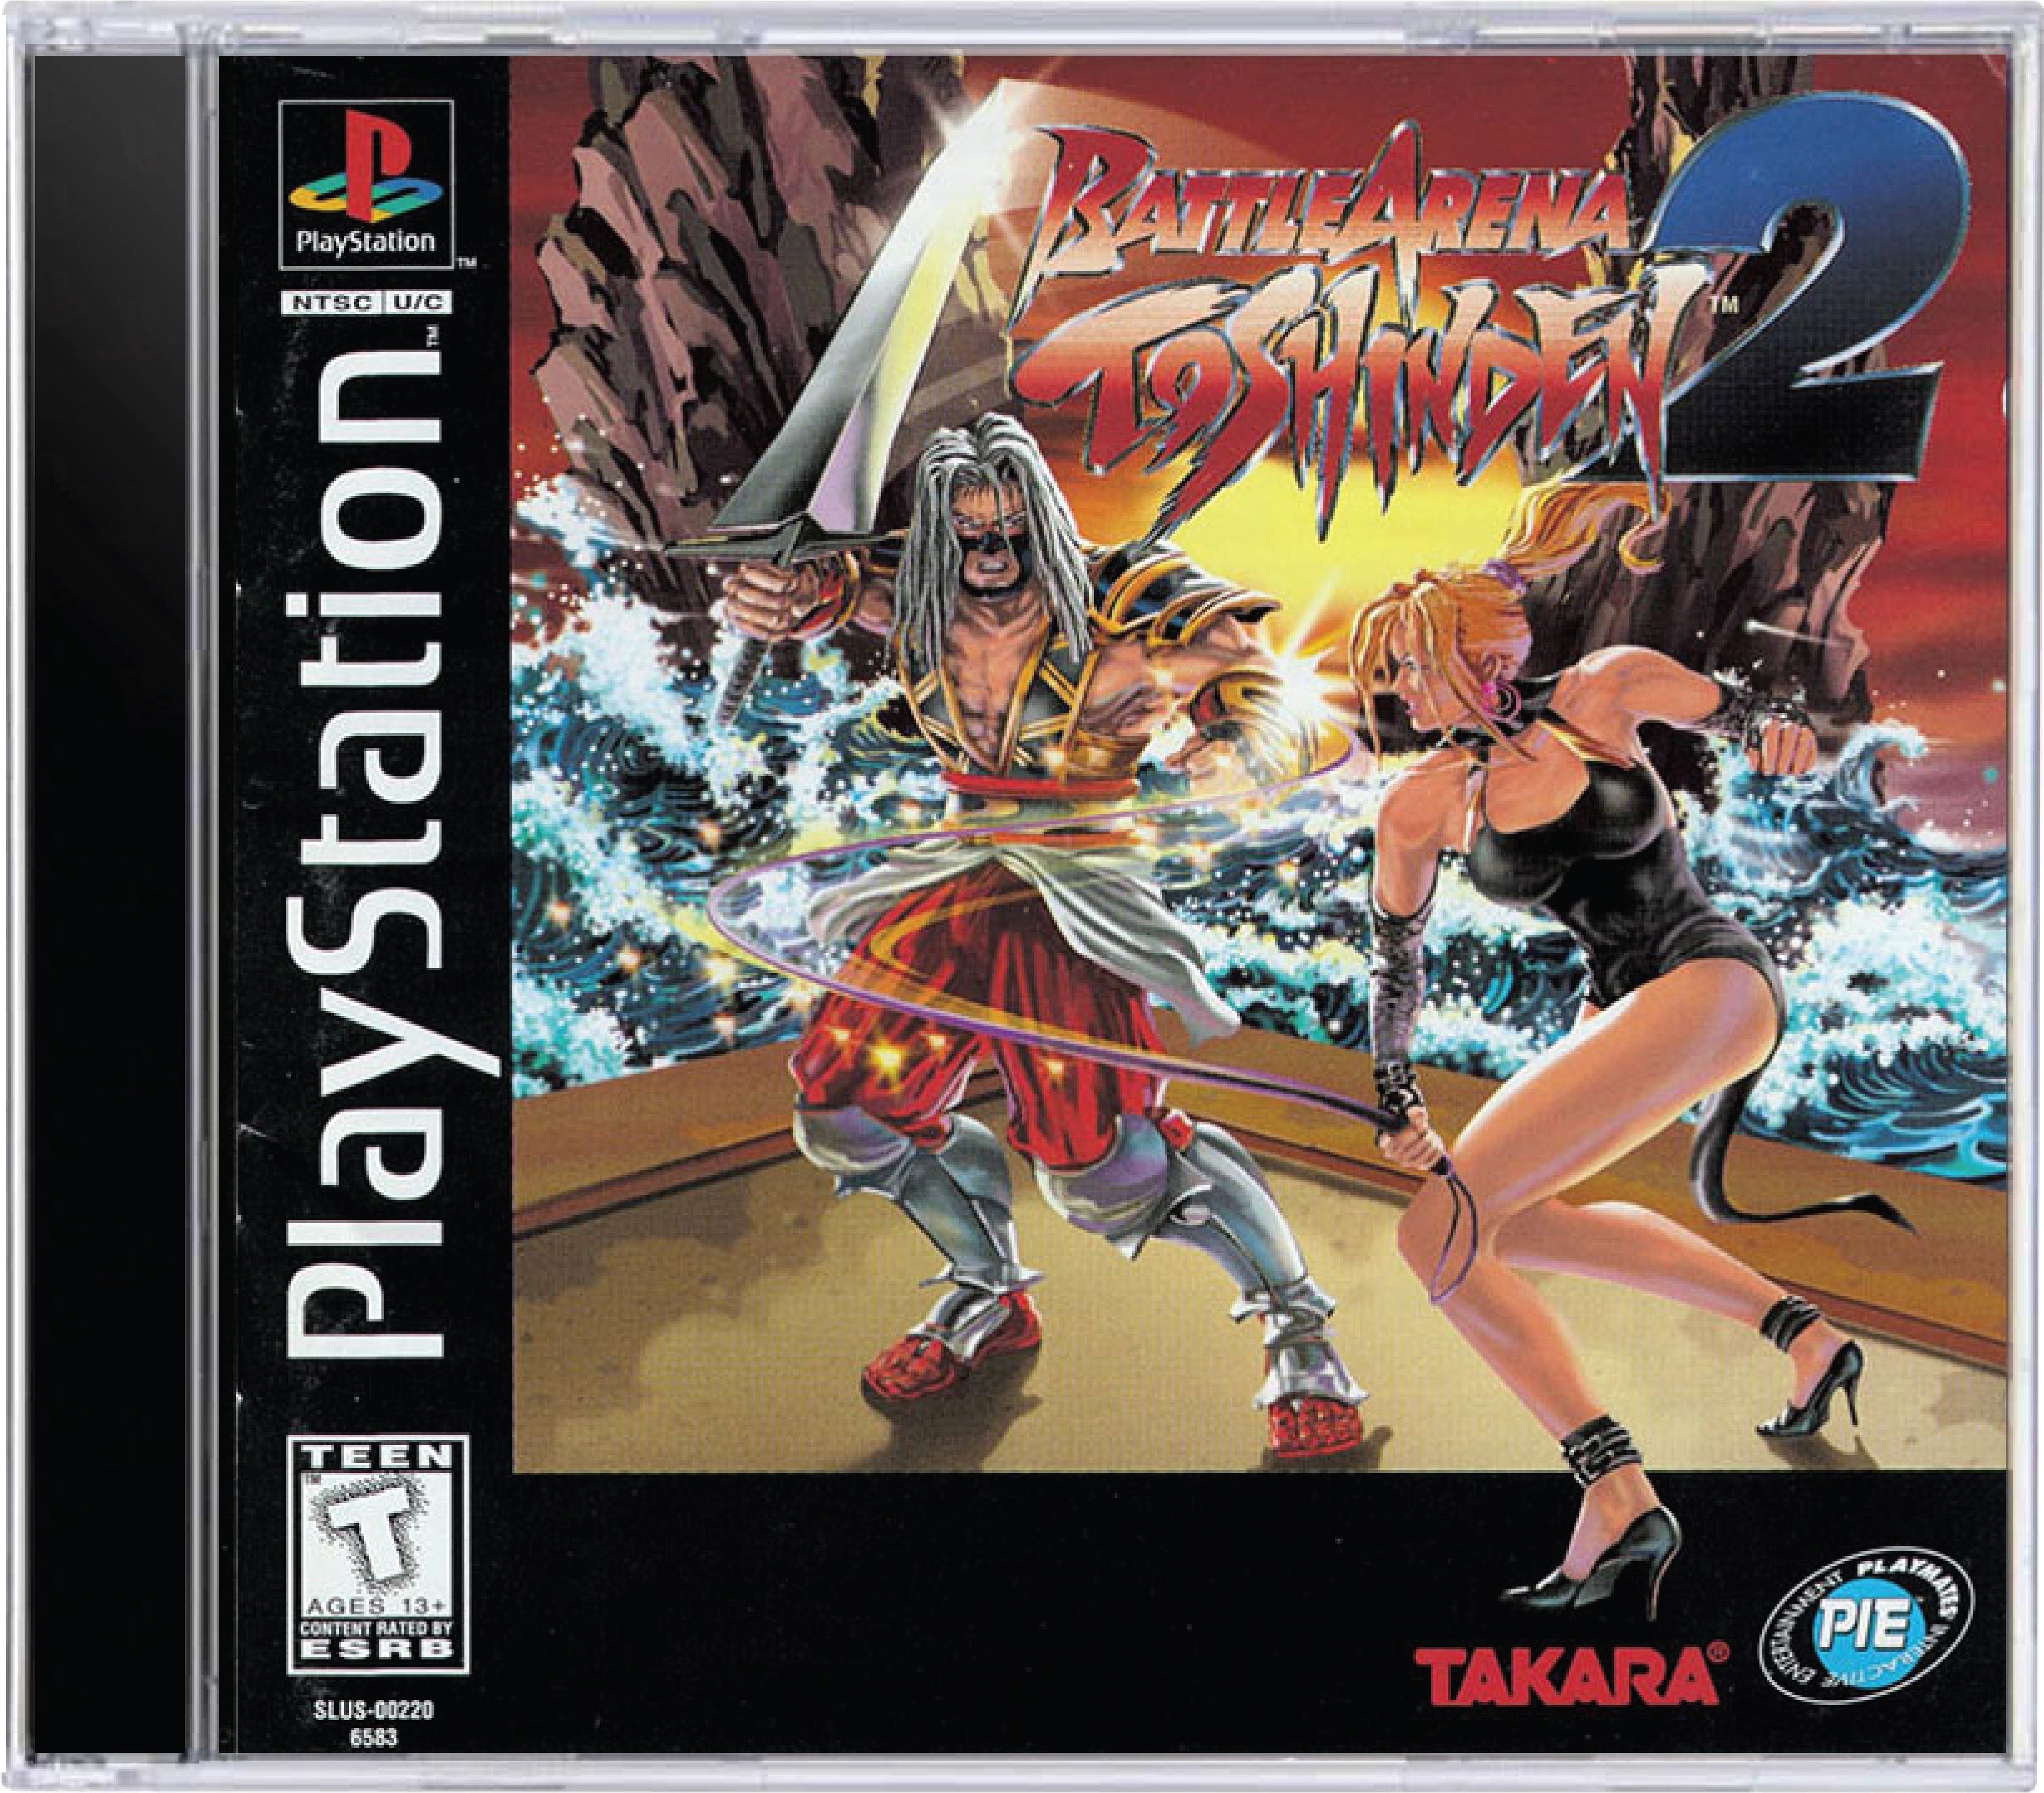 Battle Arena Toshinden 2 Cover Art and Product Photo